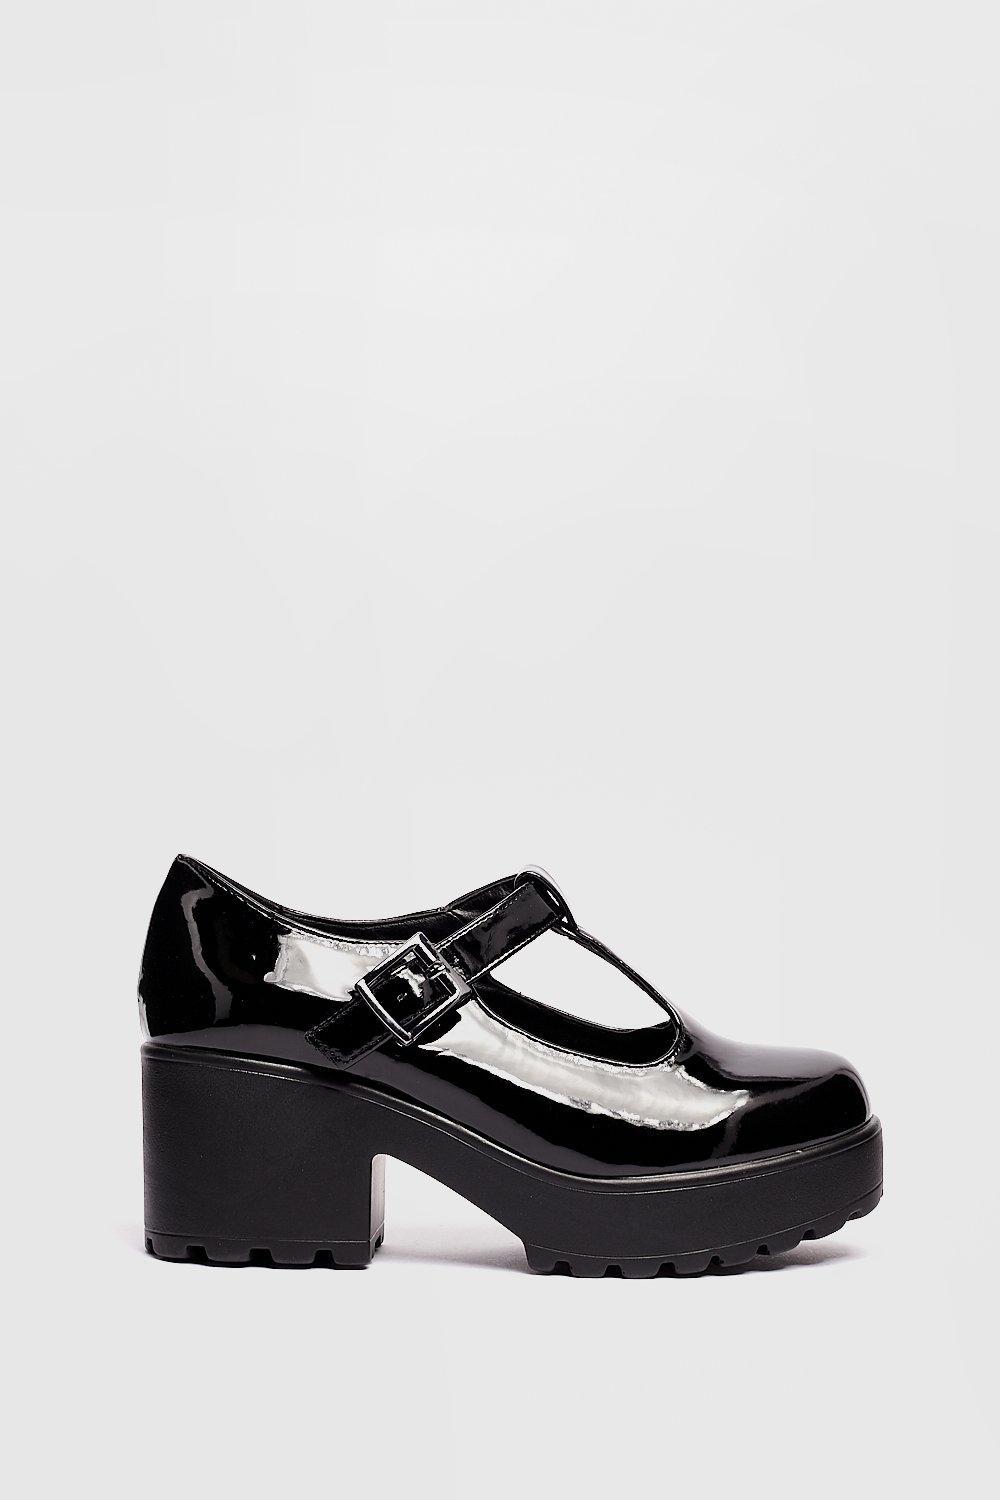 Nasty Gal Sweet Mary Jane Patent Chunky T-bar Shoes in Black | Lyst